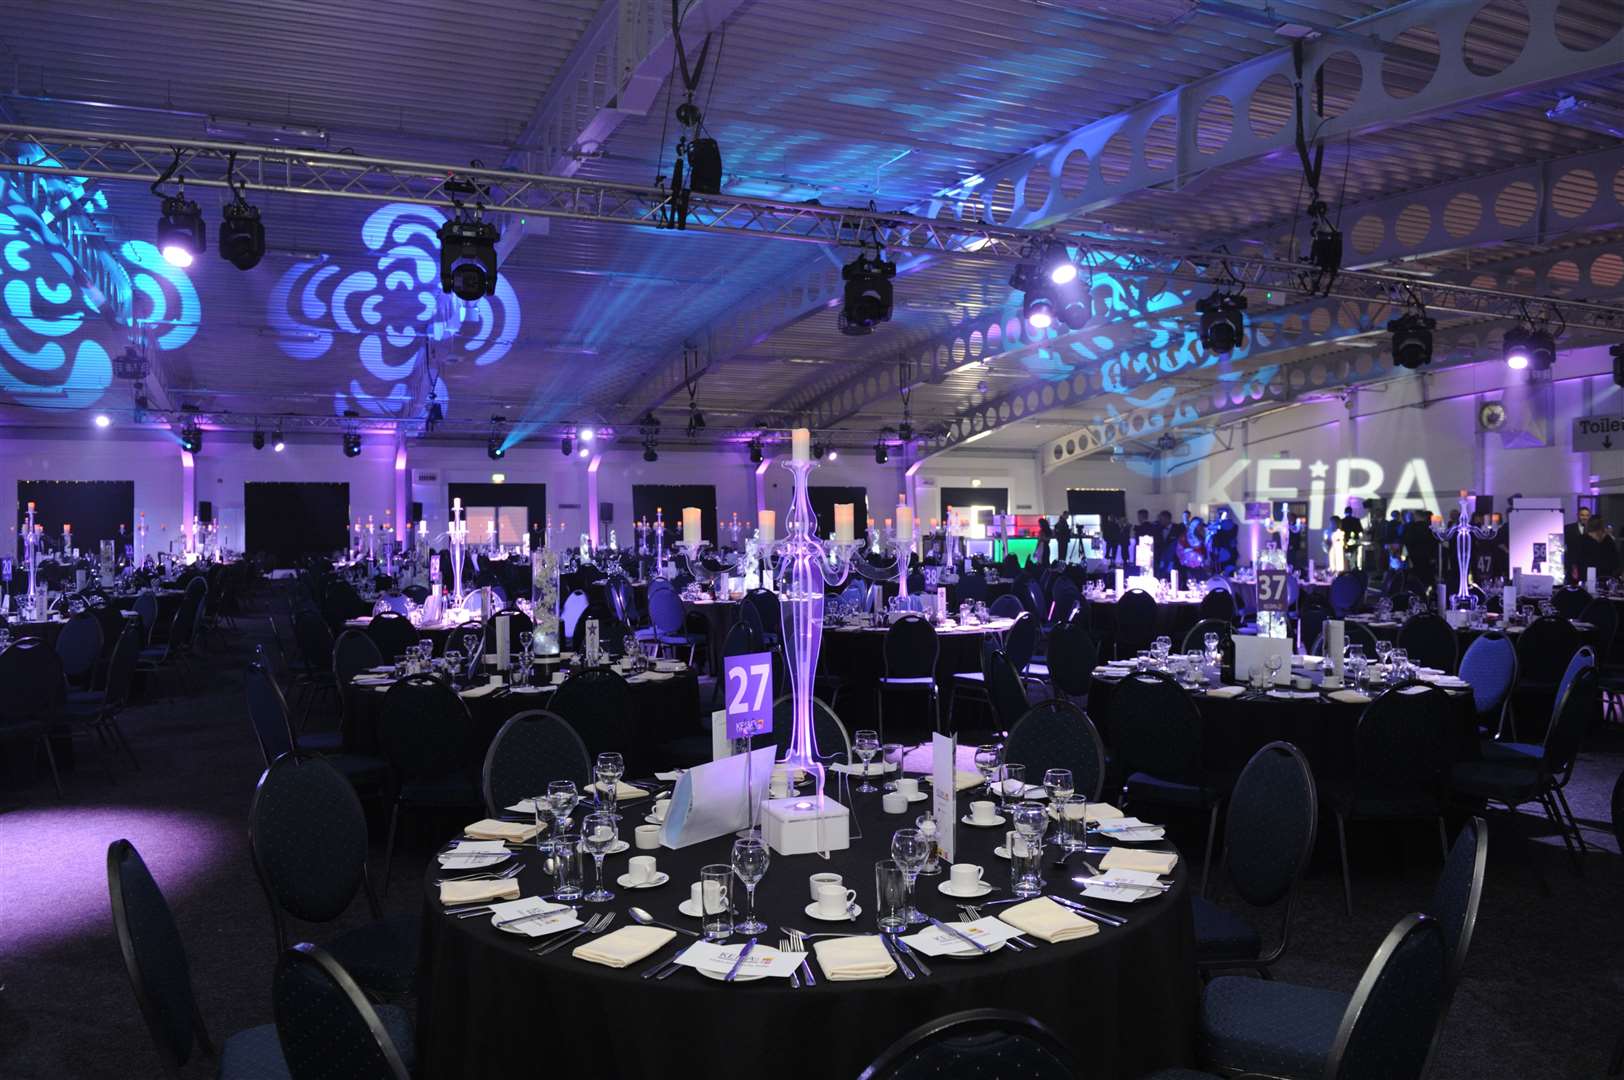 The Kent Event Centre is a regular host for major events - among them the Kent Excellence in Business Awards (KEiBA)